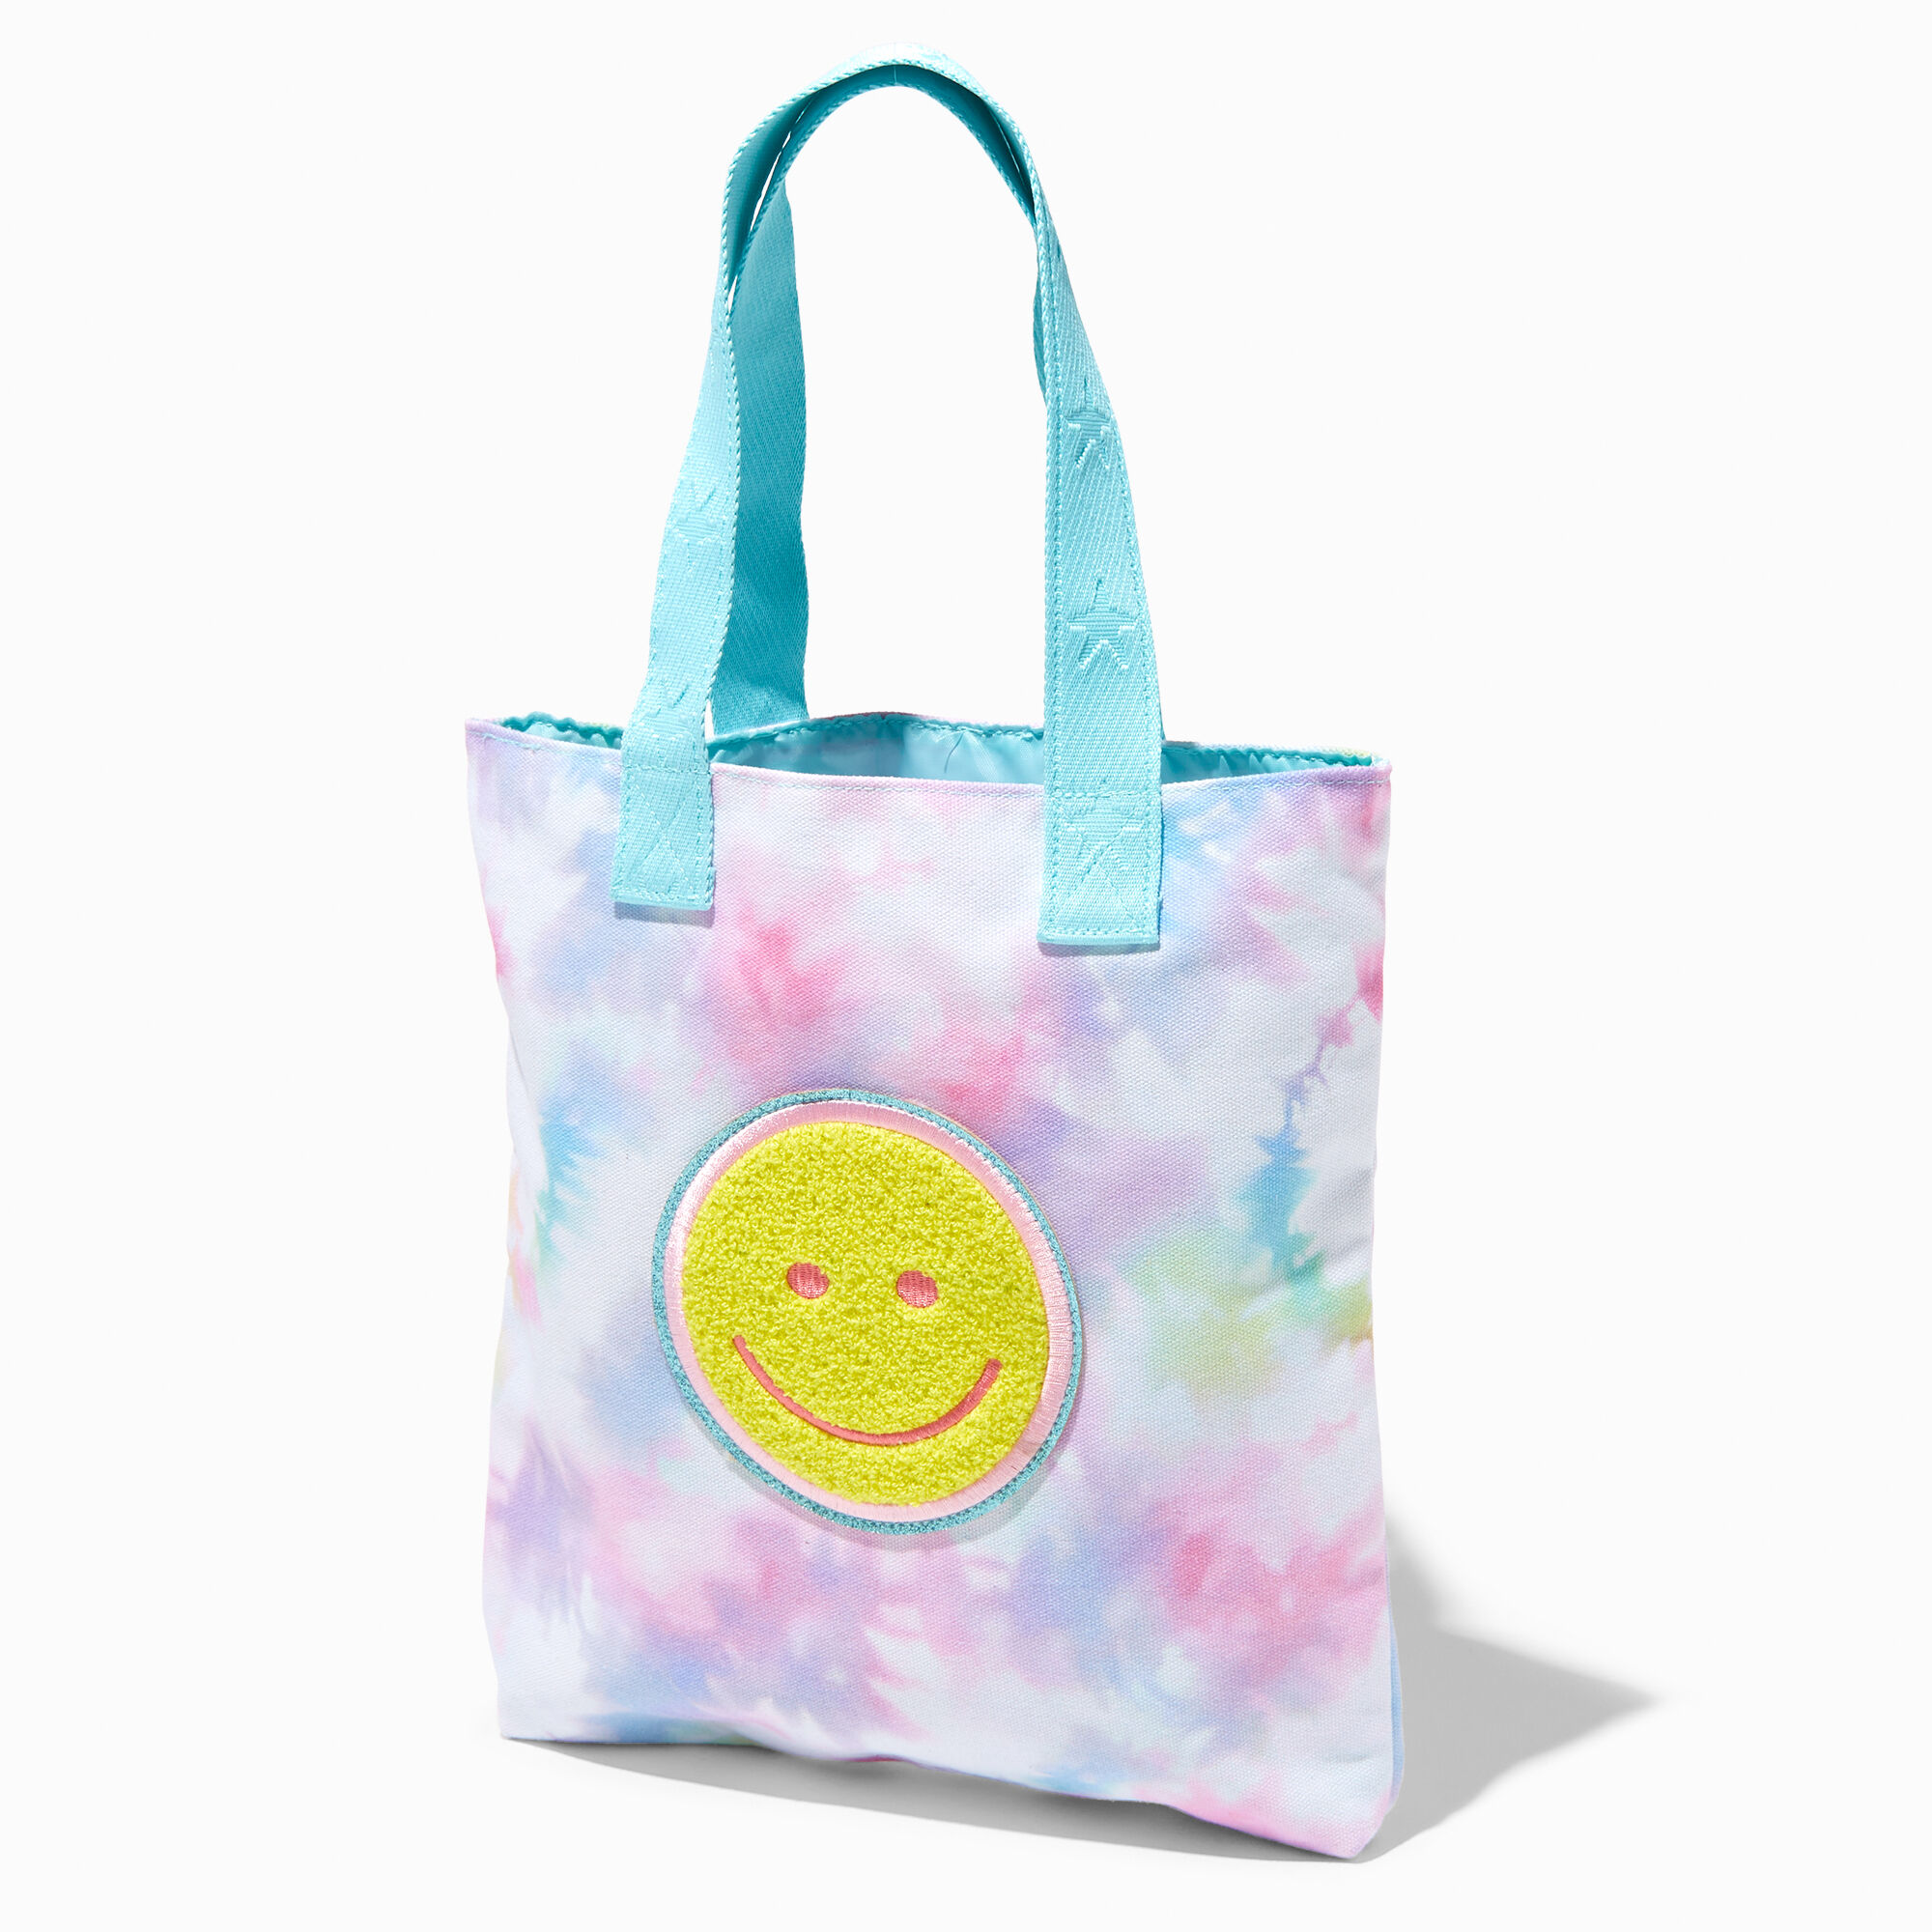 View Claires Club Tie Dye Happy Face Tote Bag information